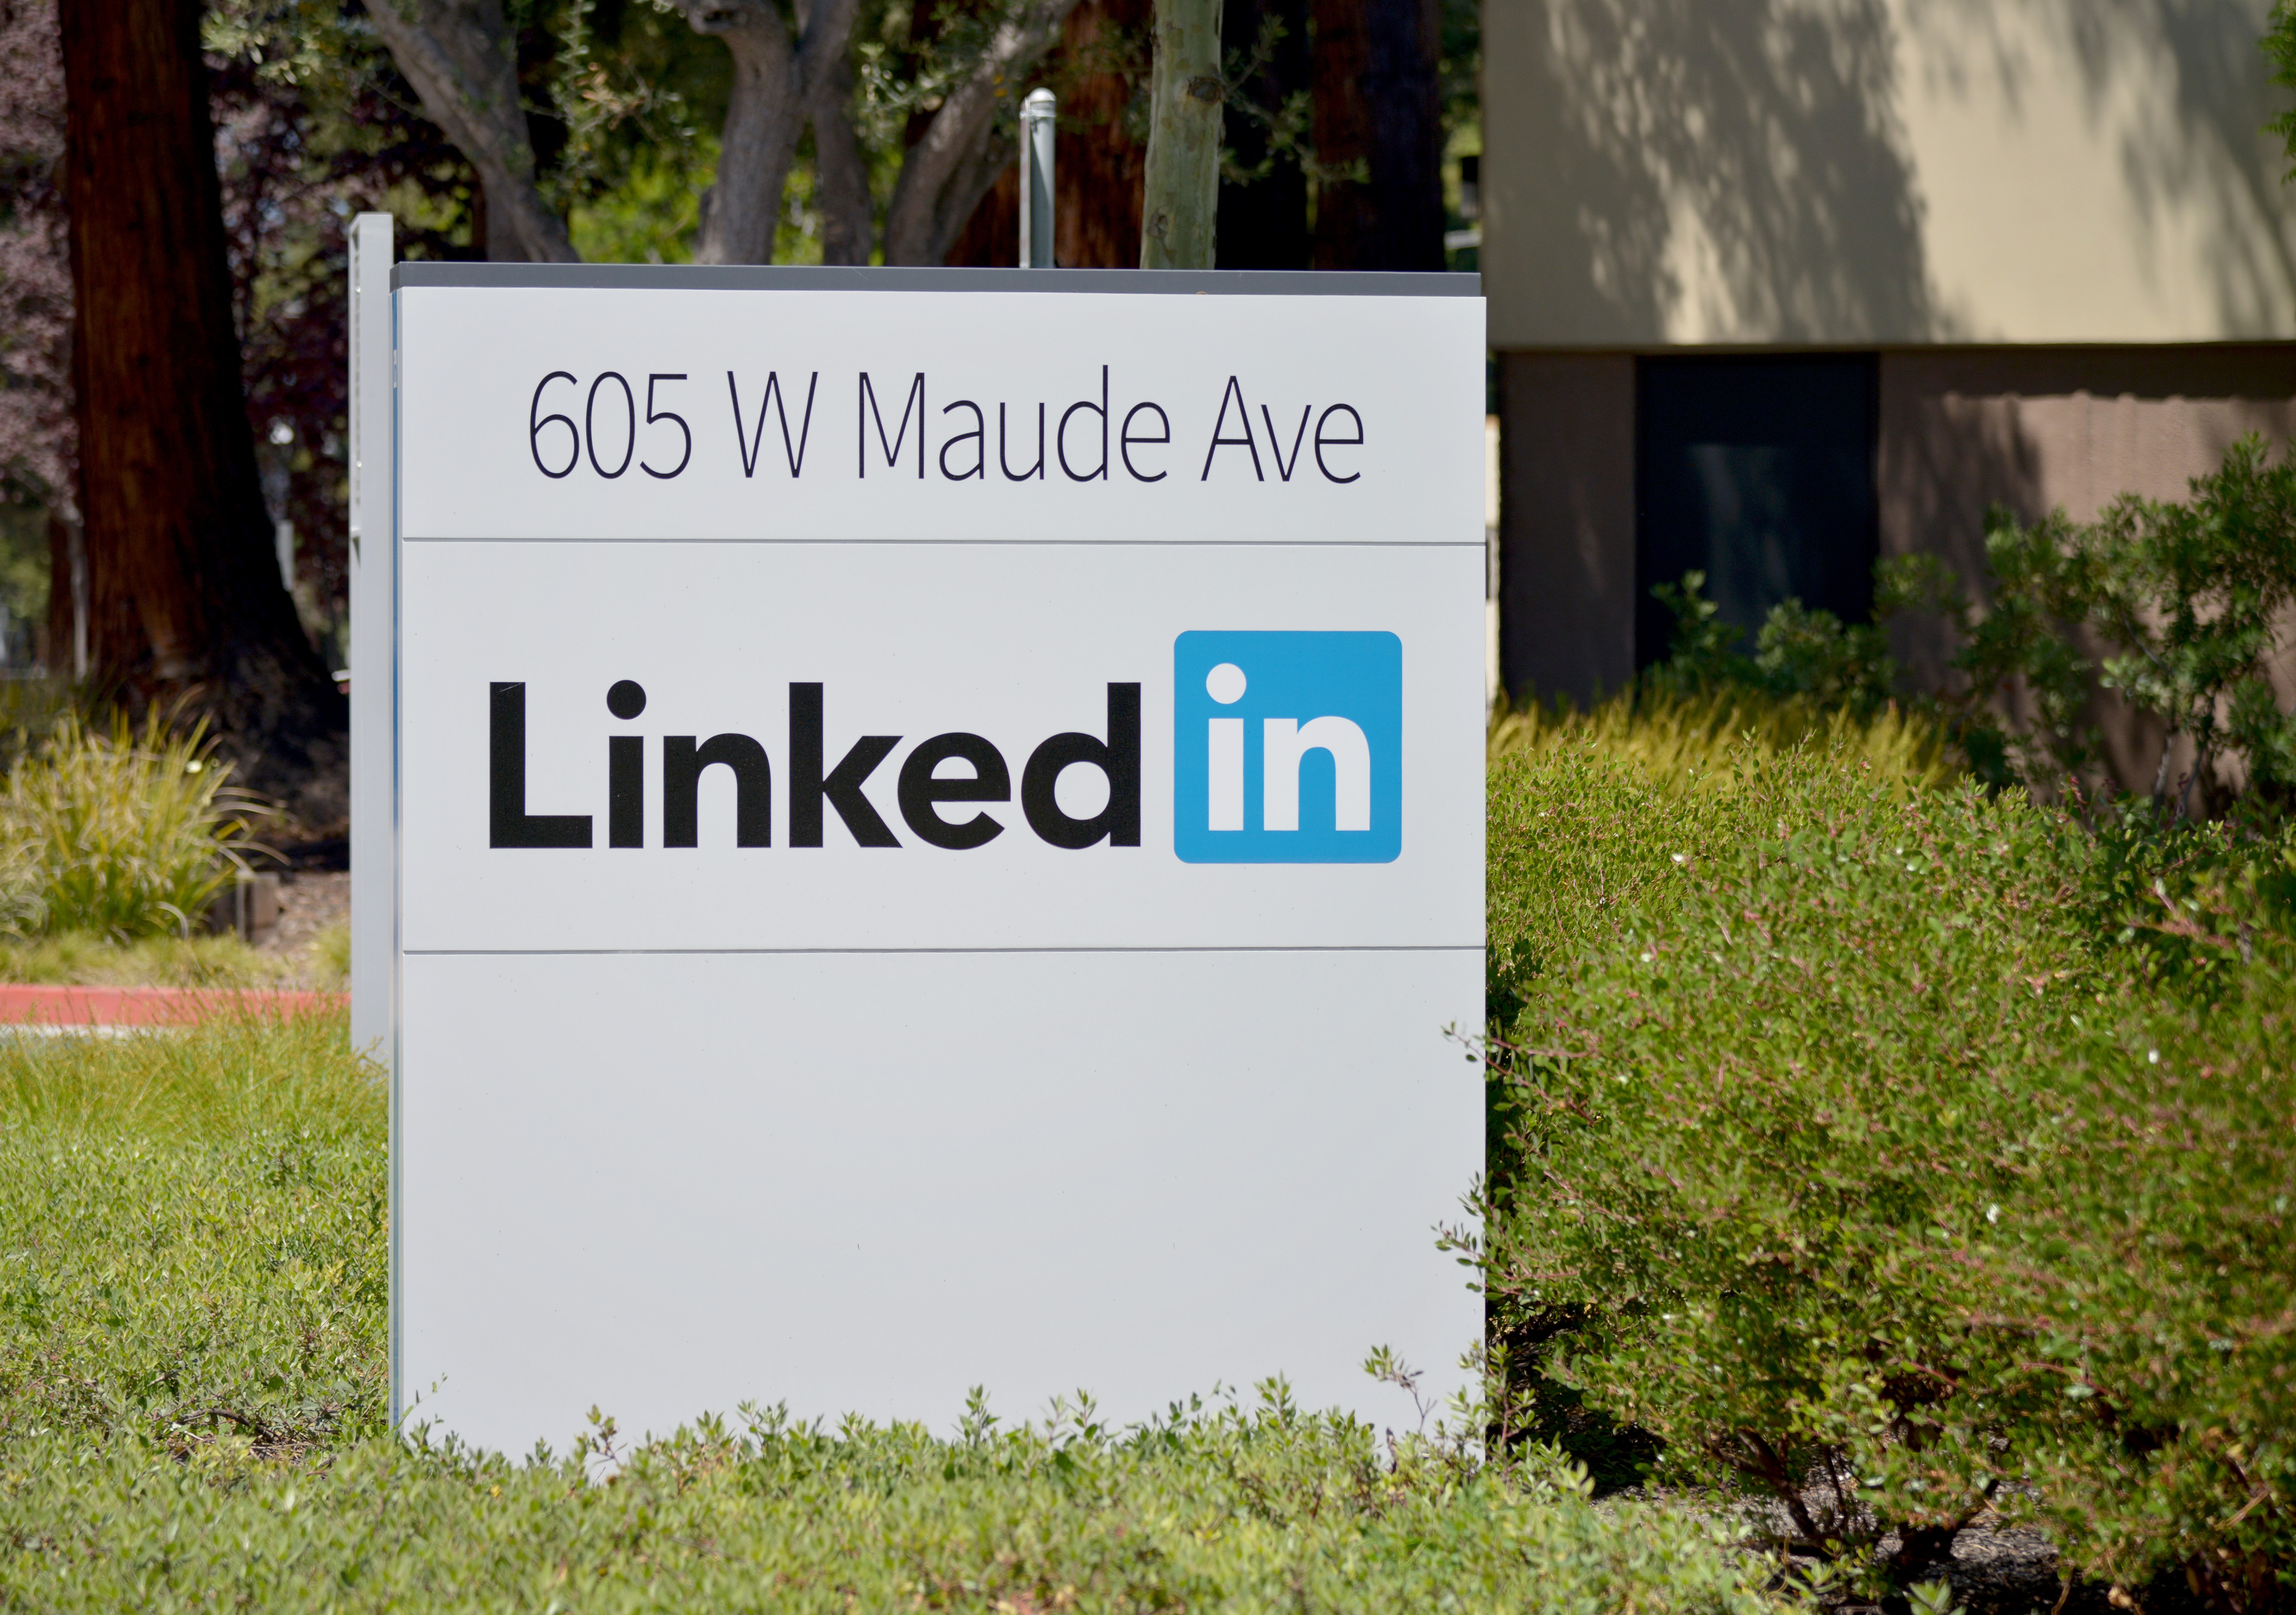 Lullar com profile search by email with a picture of LinkedIn, 605 W Maude Ave address